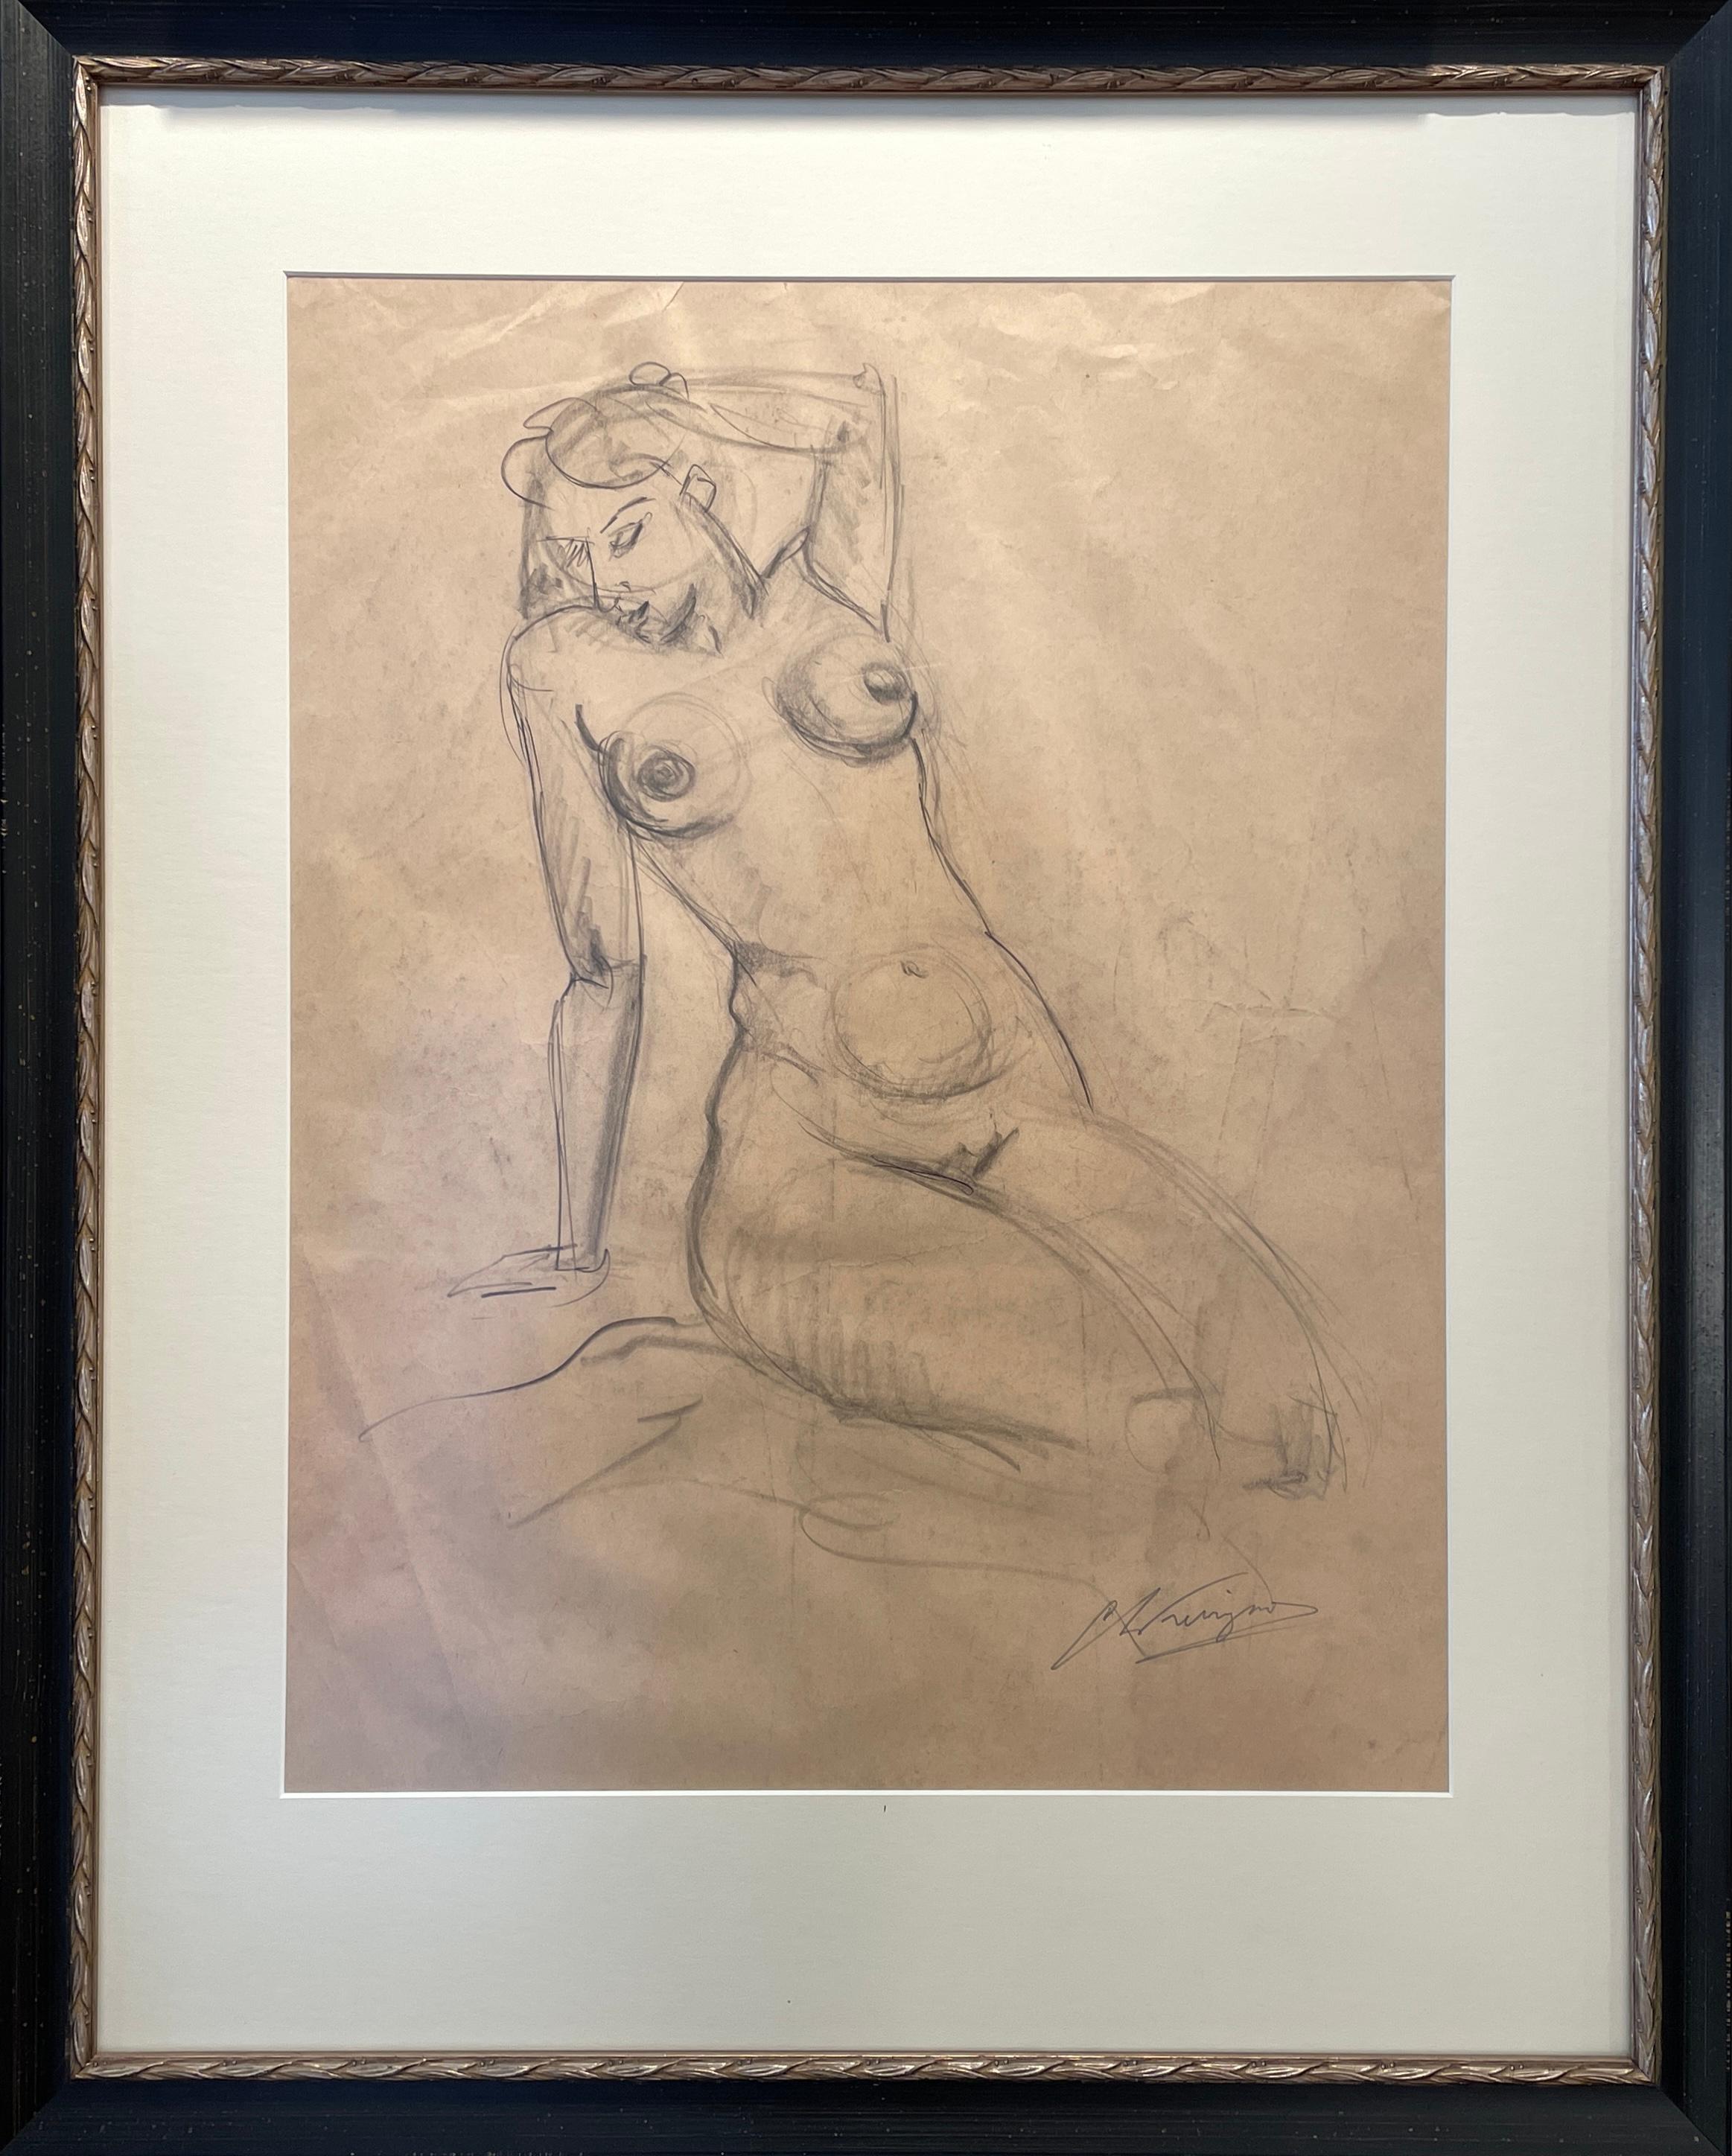 'Nude Woman' by Chris Ferrigno - 1970s Figurative Nude Drawing Pencil on Paper